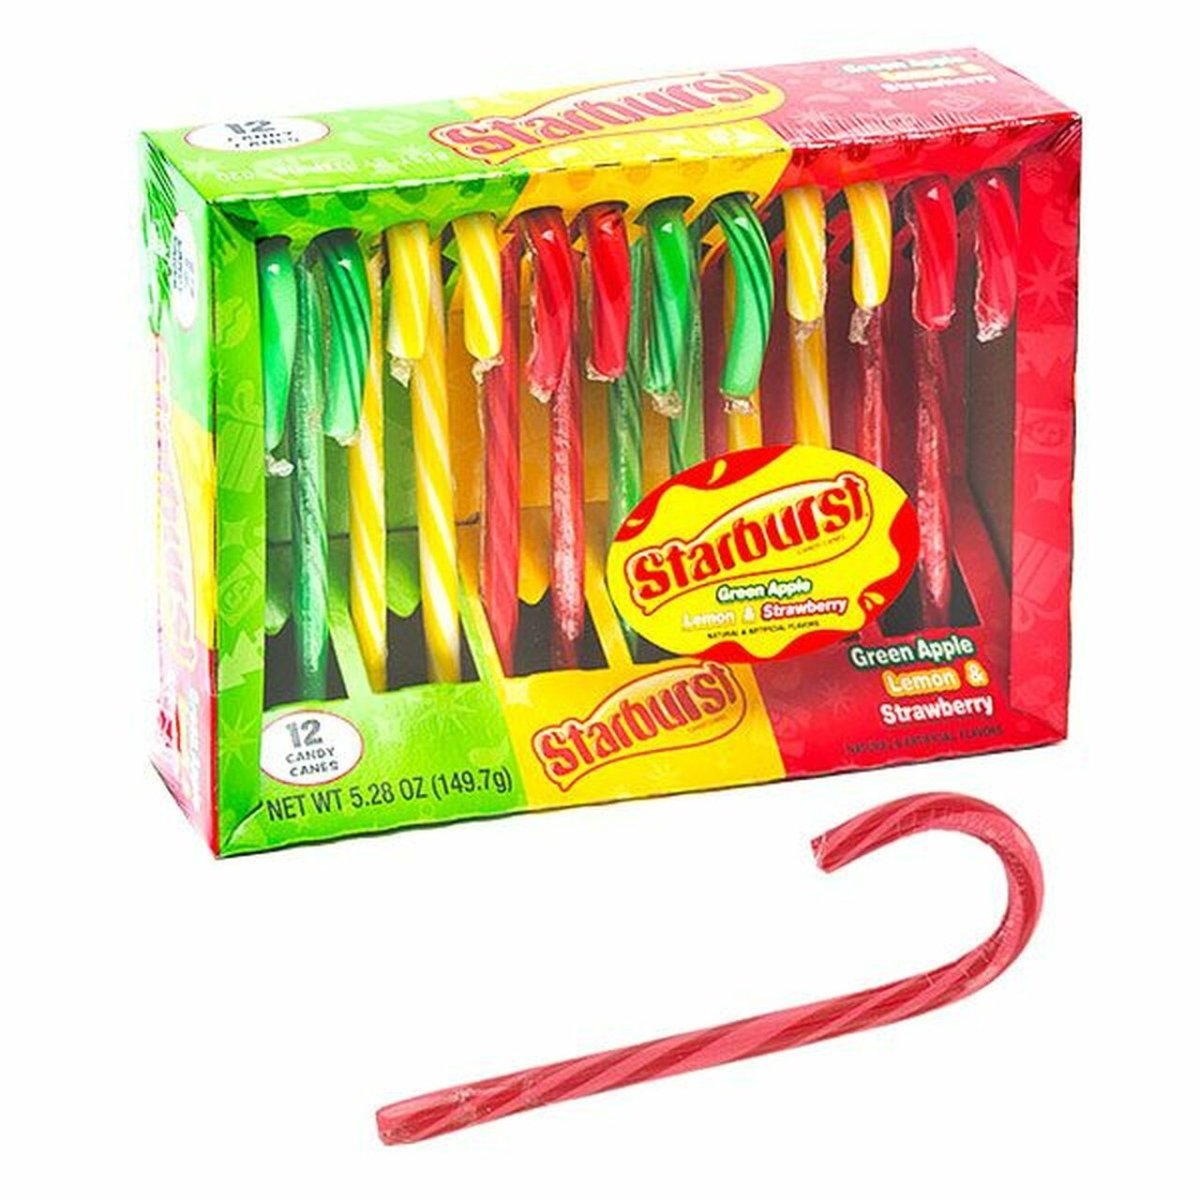 Starburst Candy Canes 150g - Candy Mail UK